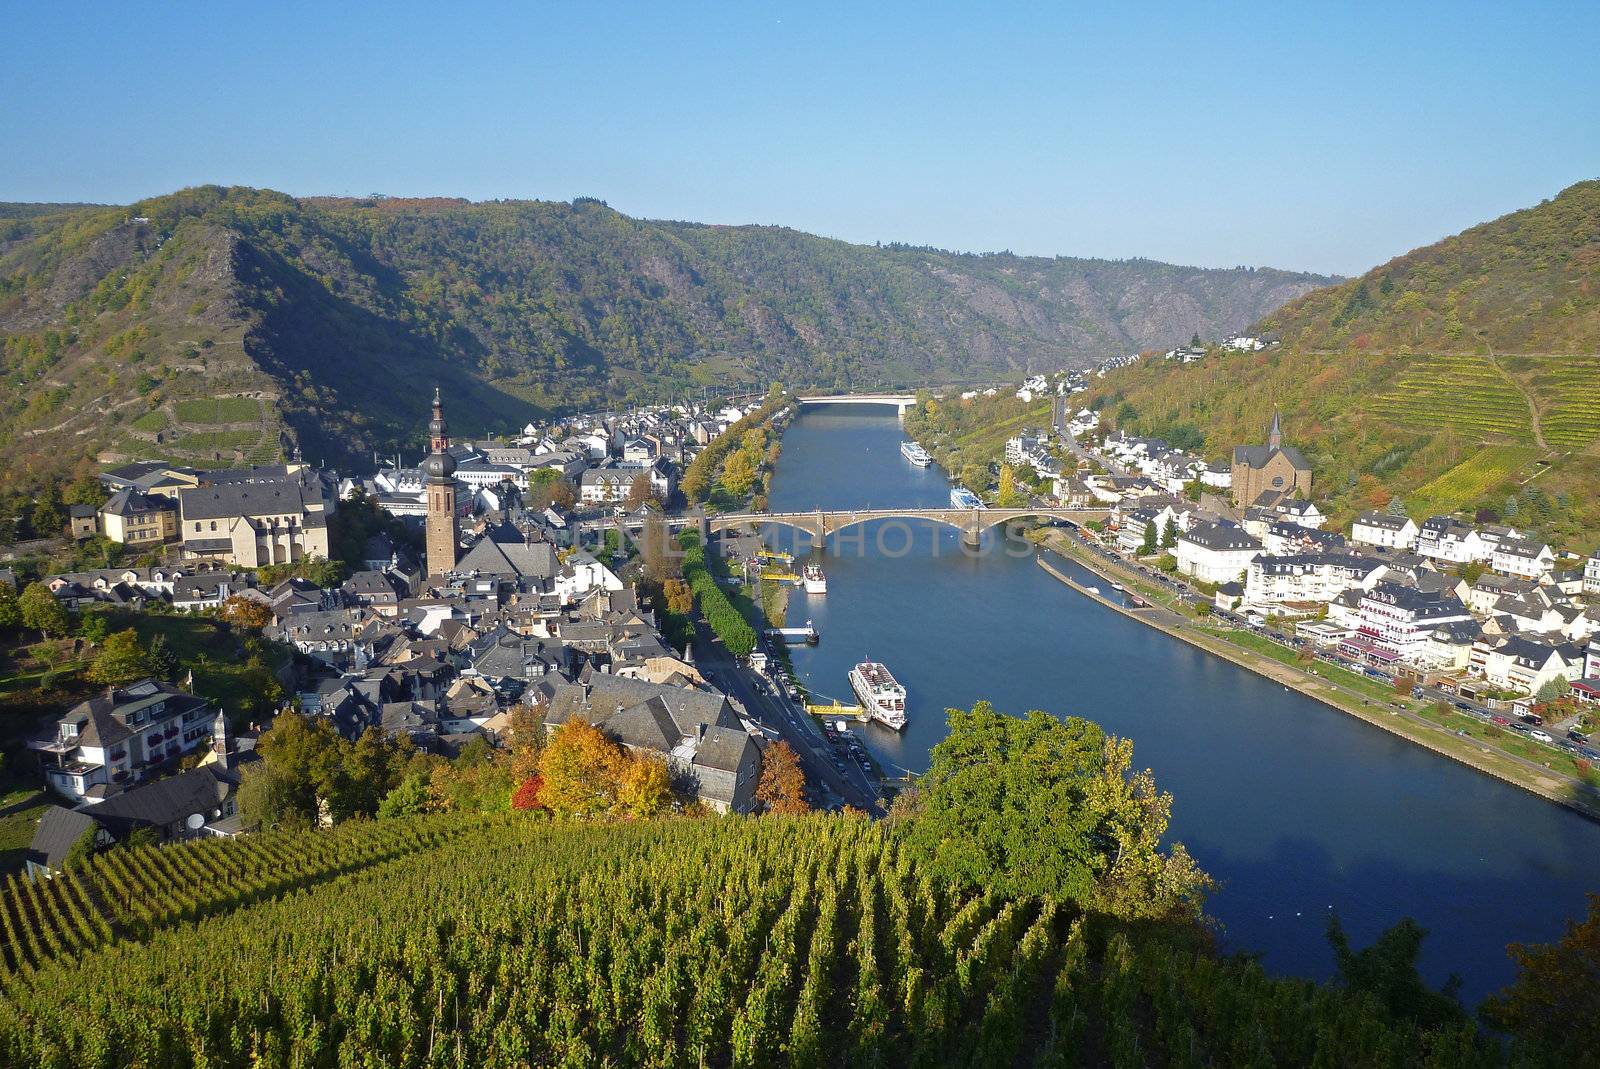 Panorama view over Cochem, Mosel river, Germany, Europe